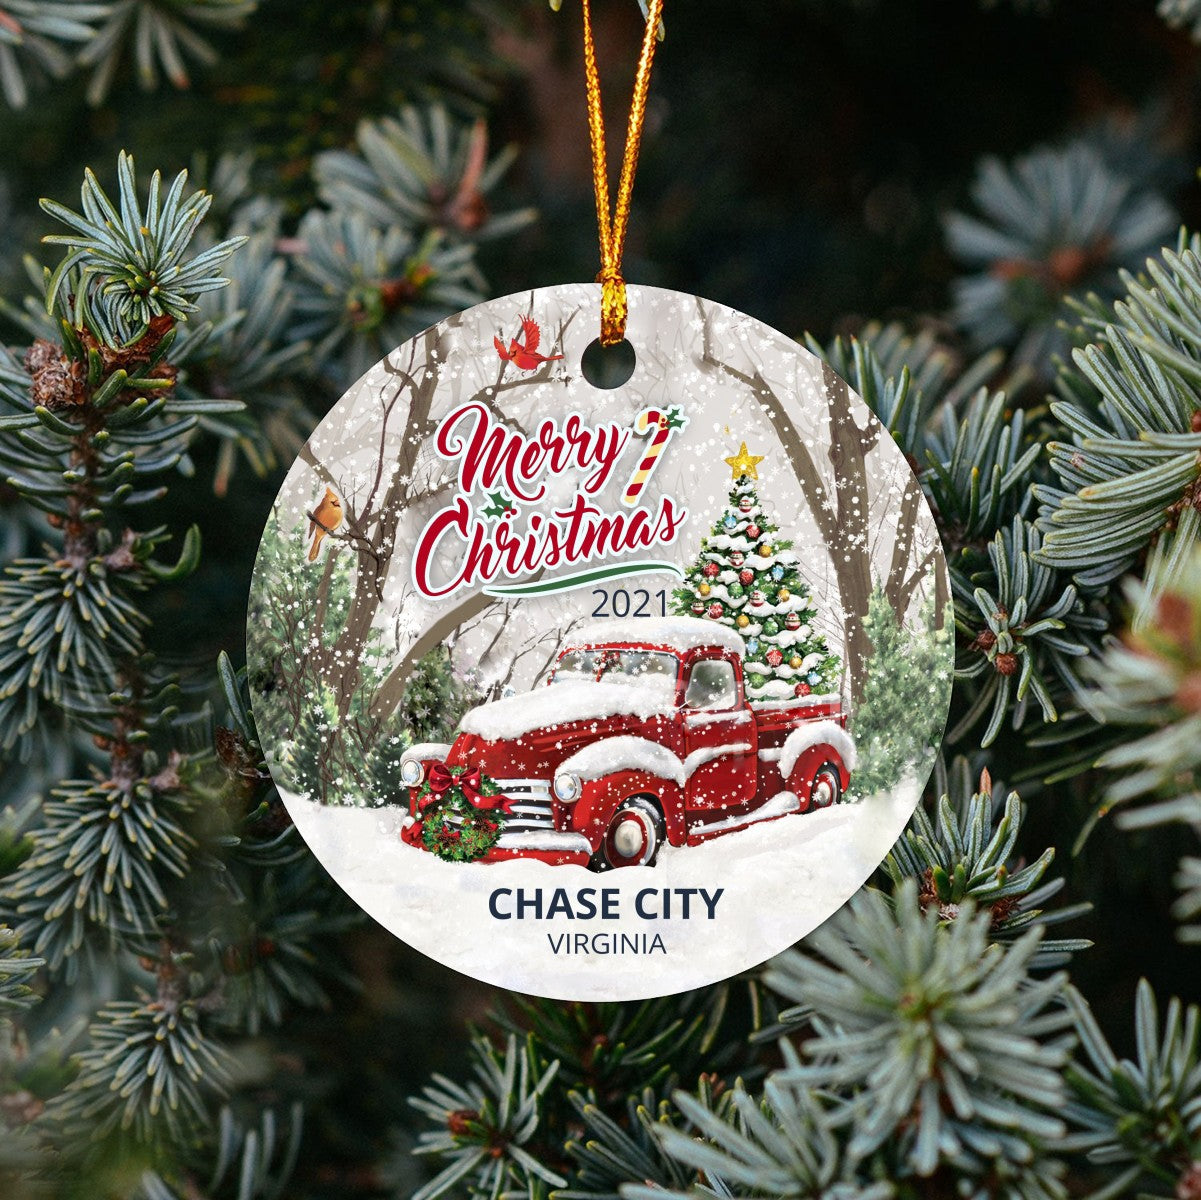 Christmas Tree Ornaments Chase City - Ornament With Name City, State Chase City Virginia VA Ornament - Red Truck Xmas Ornaments 3'' Plastic Gift For Family, Friend And Housewarming